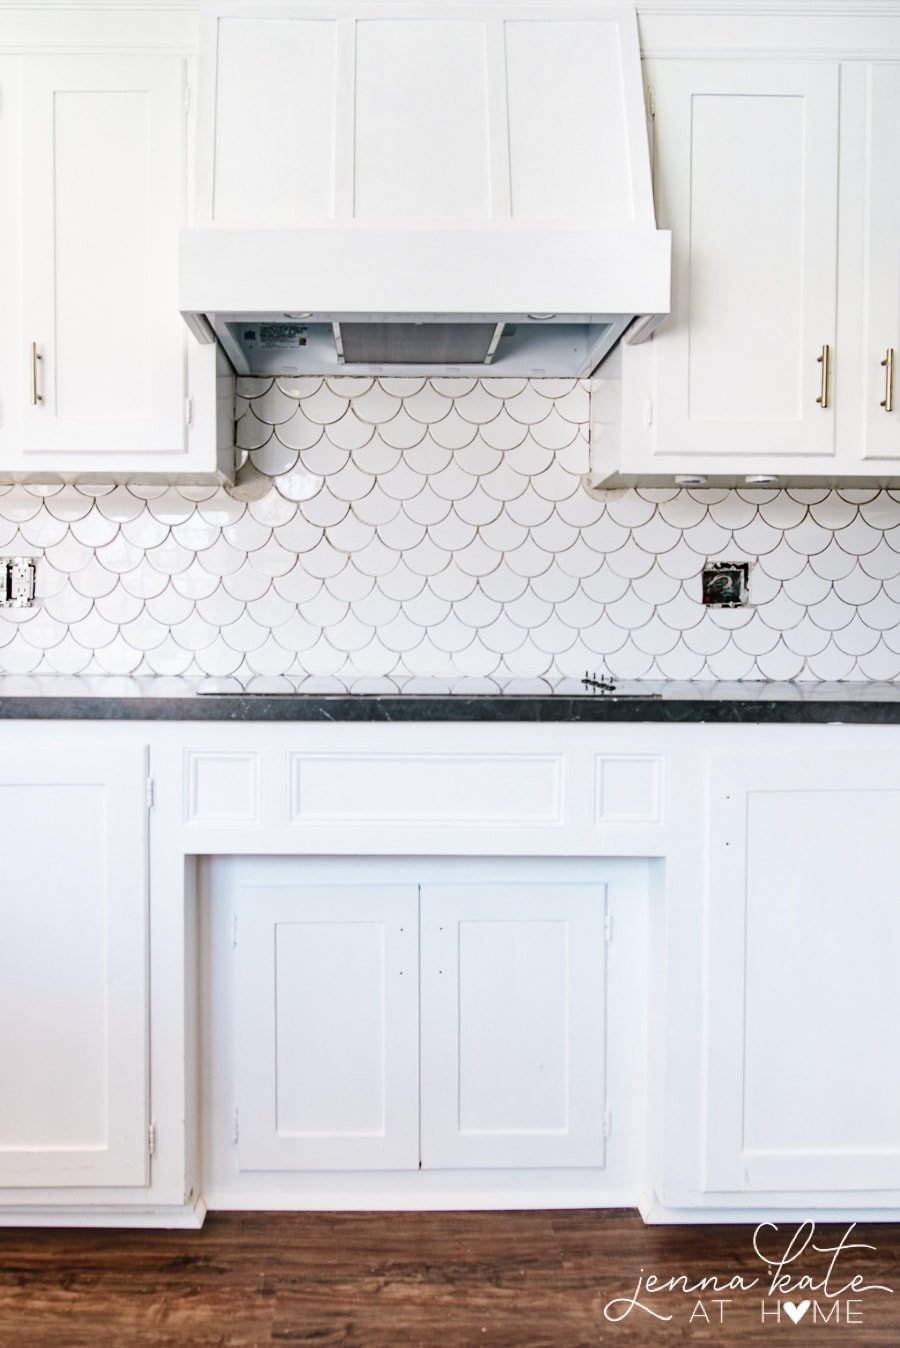 How to Build a DIY Range Hood Cover